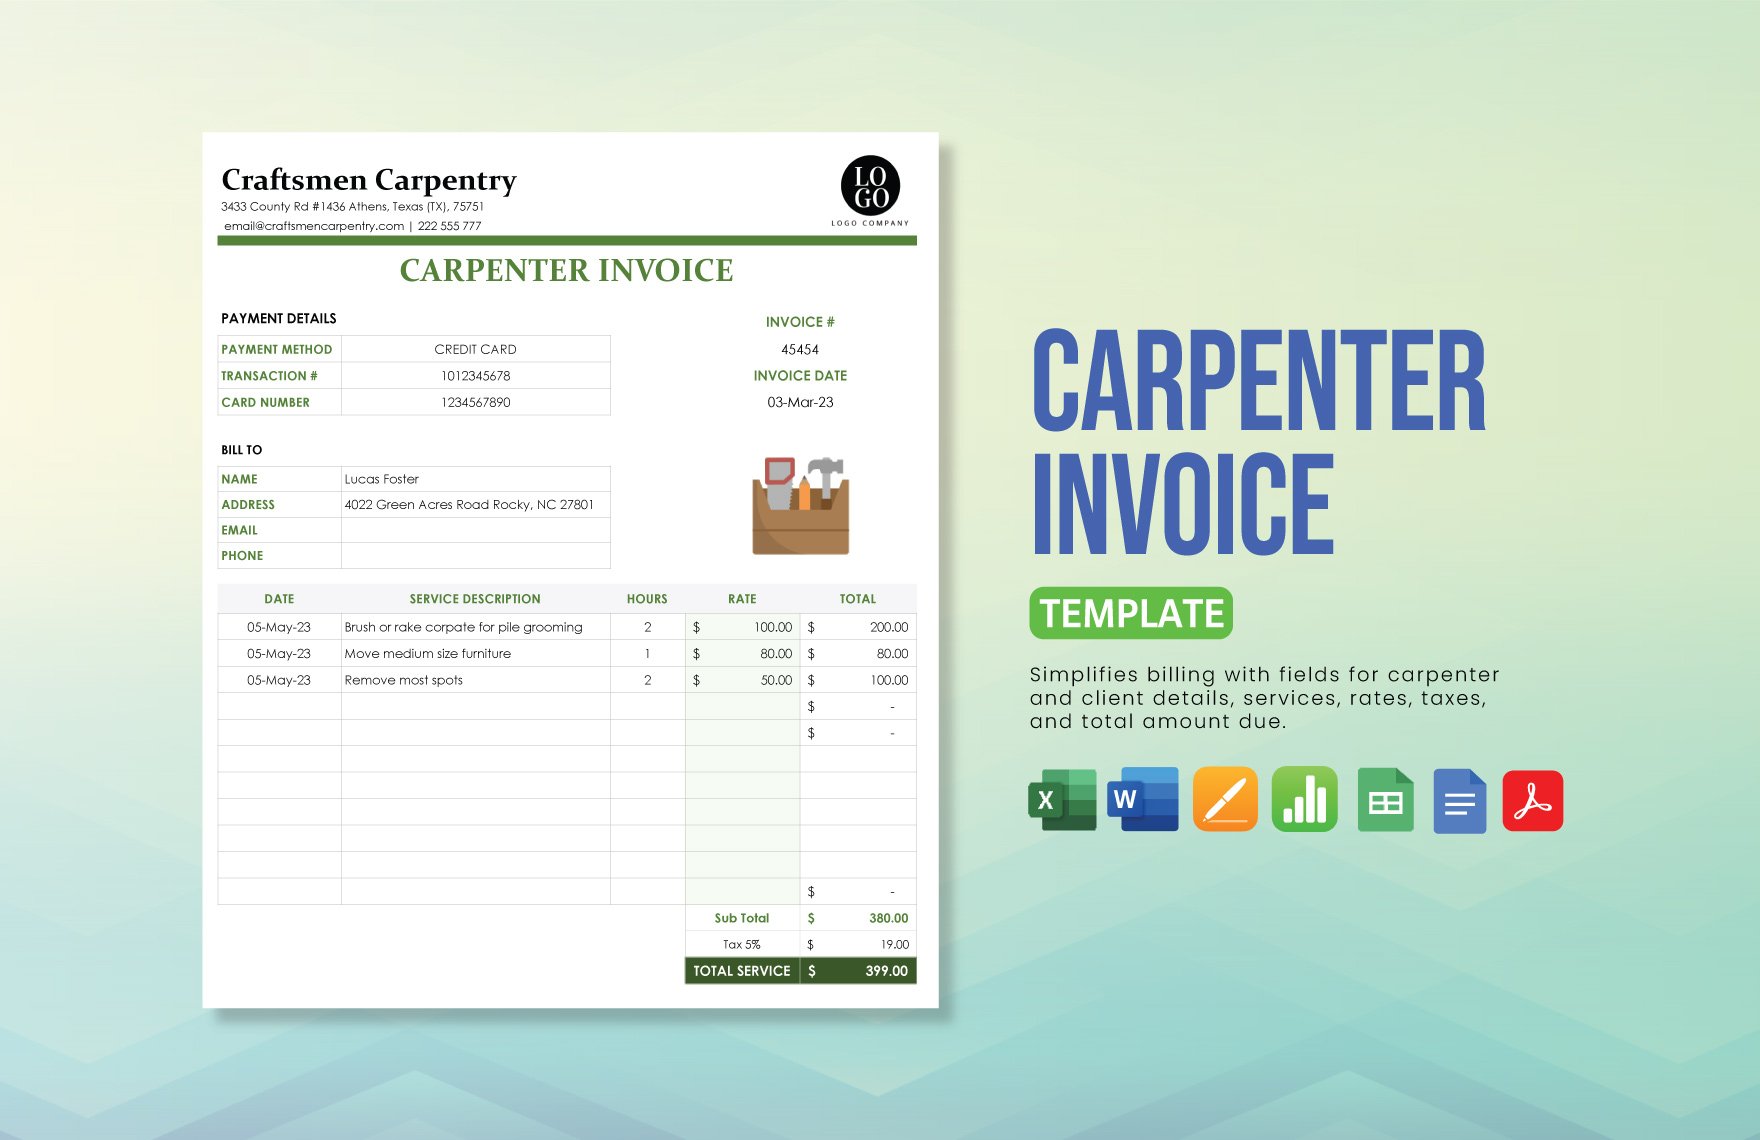 Carpenter Invoice Template in Word, Google Docs, Excel, PDF, Google Sheets, Apple Pages, Apple Numbers